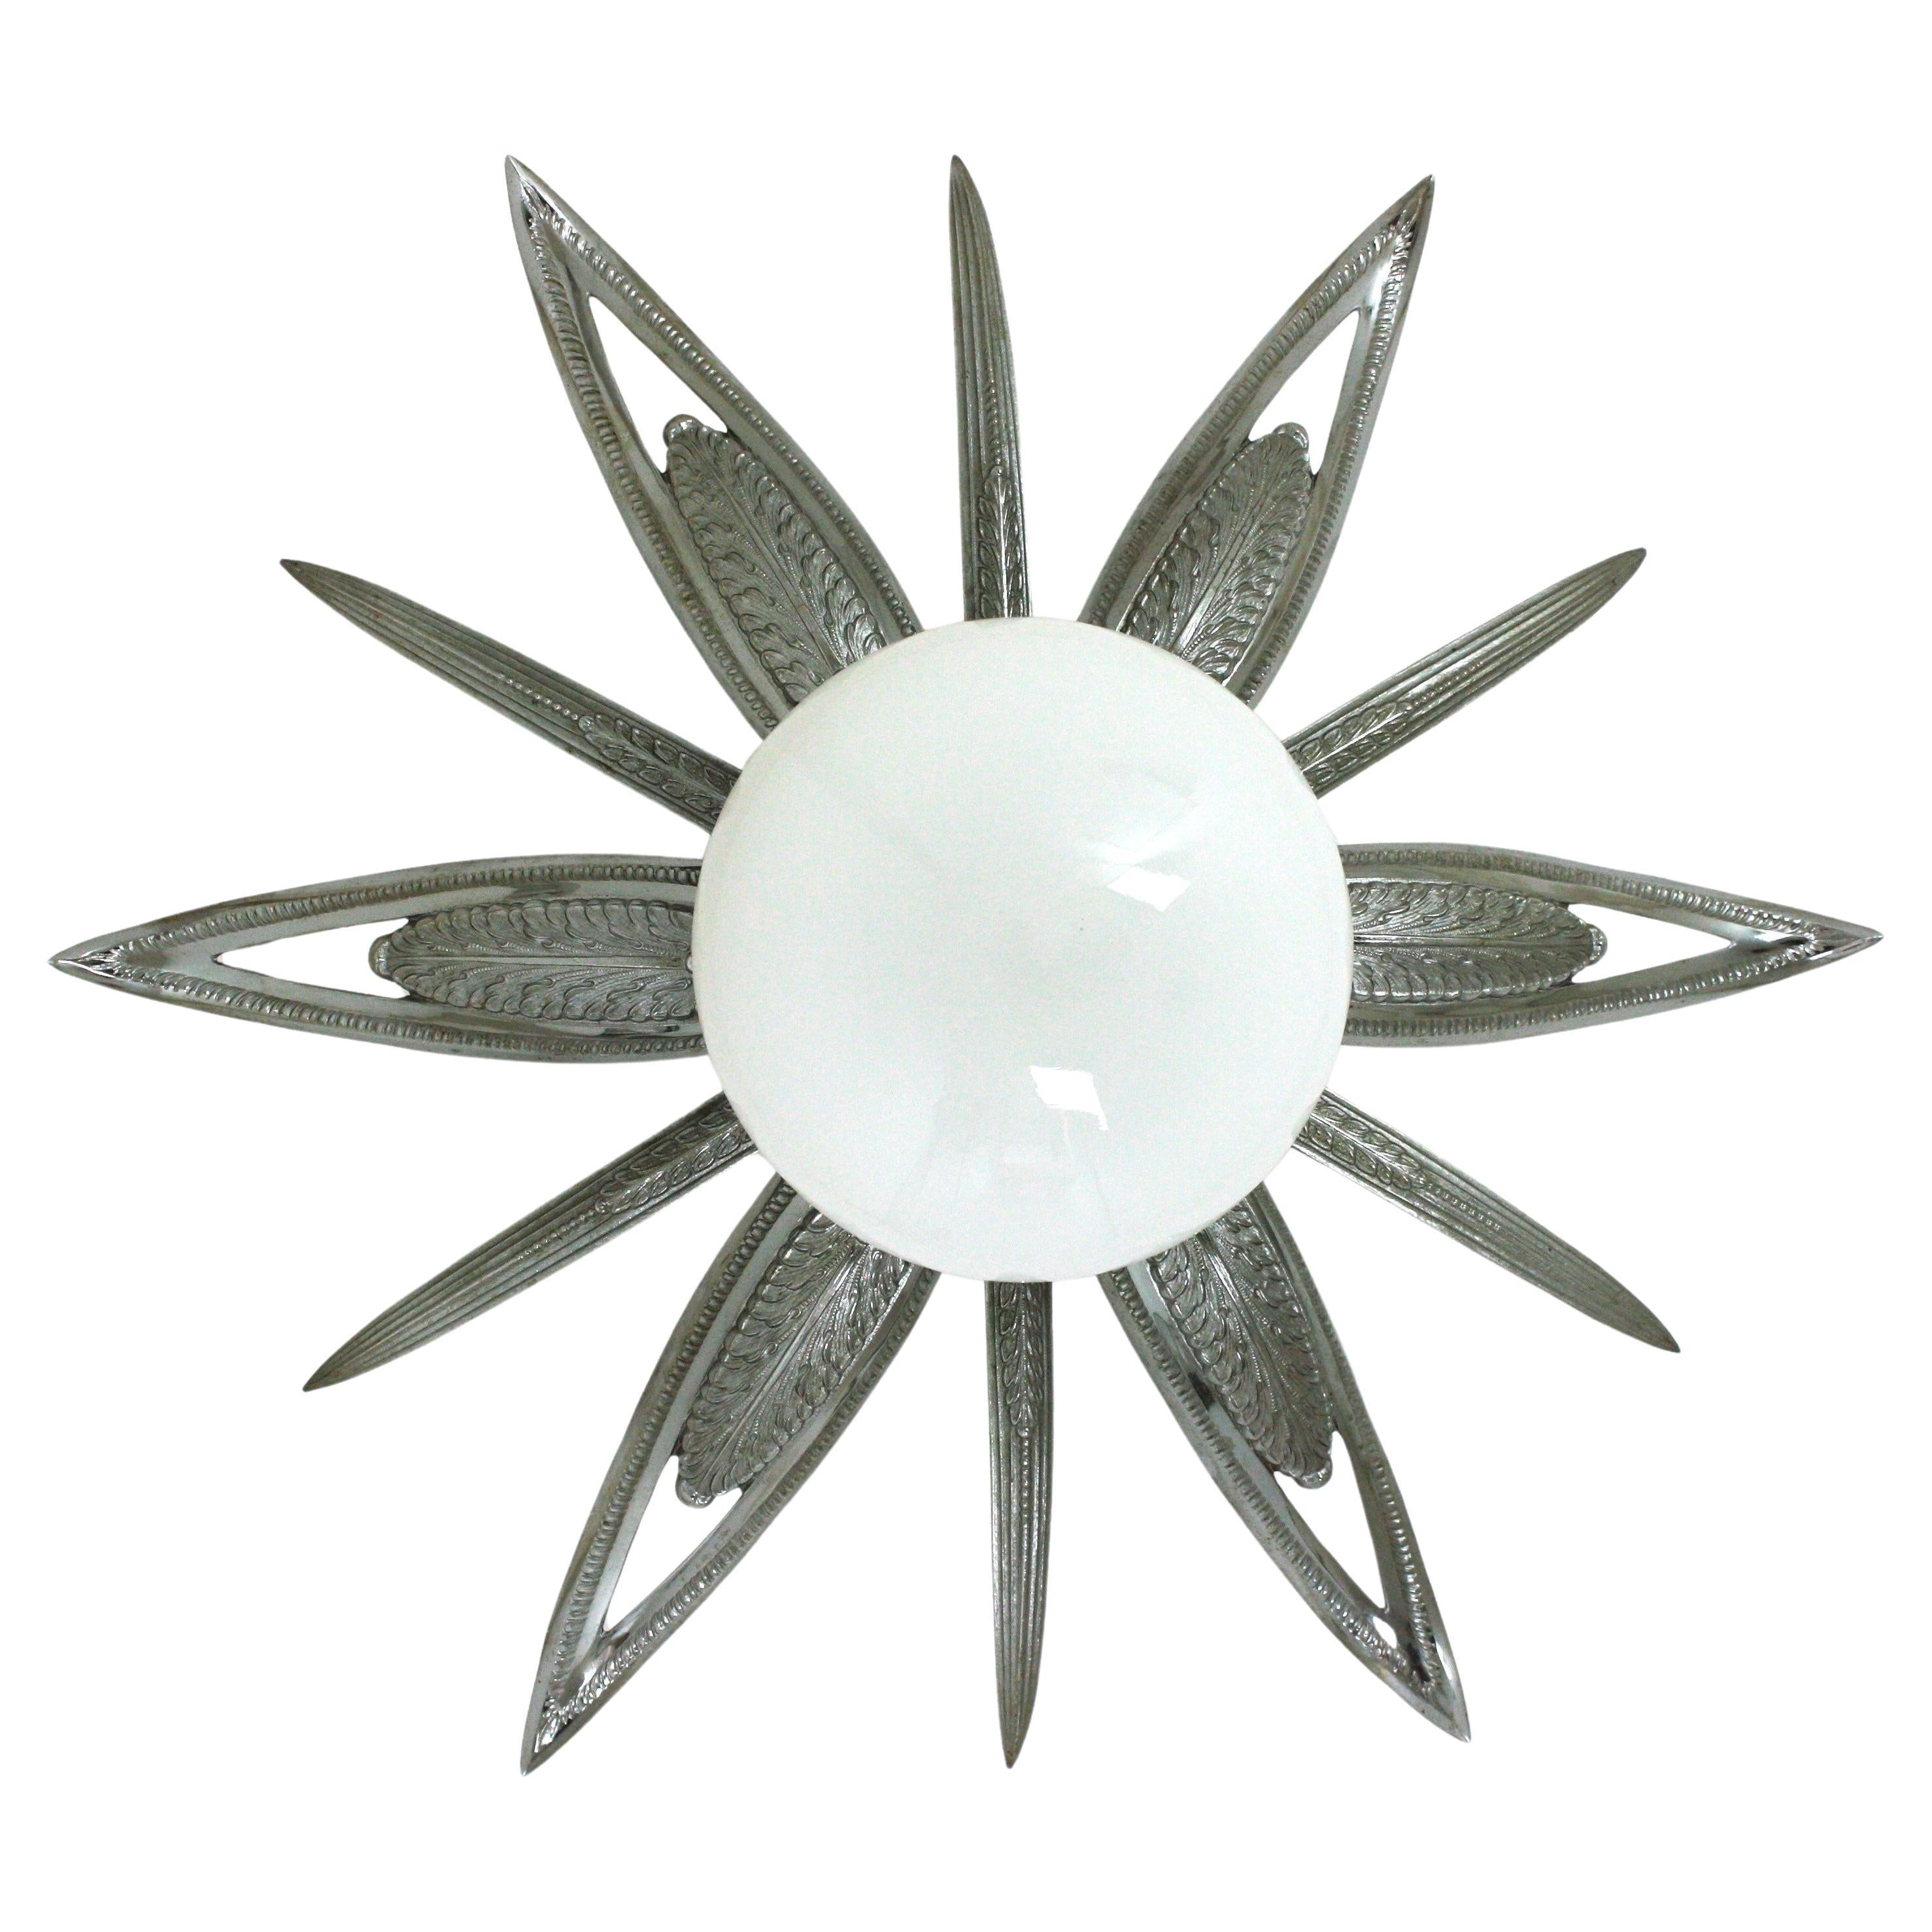 Eye-catching Art Deco starburst shaped engraved and molded silvered bronze ceiling lamp, France, 1930s-1940s.
Large size and 7 lights
This flush mount features a flower burst or starburst with 6 large leaves or rays, 6 pointed smaller rays and an